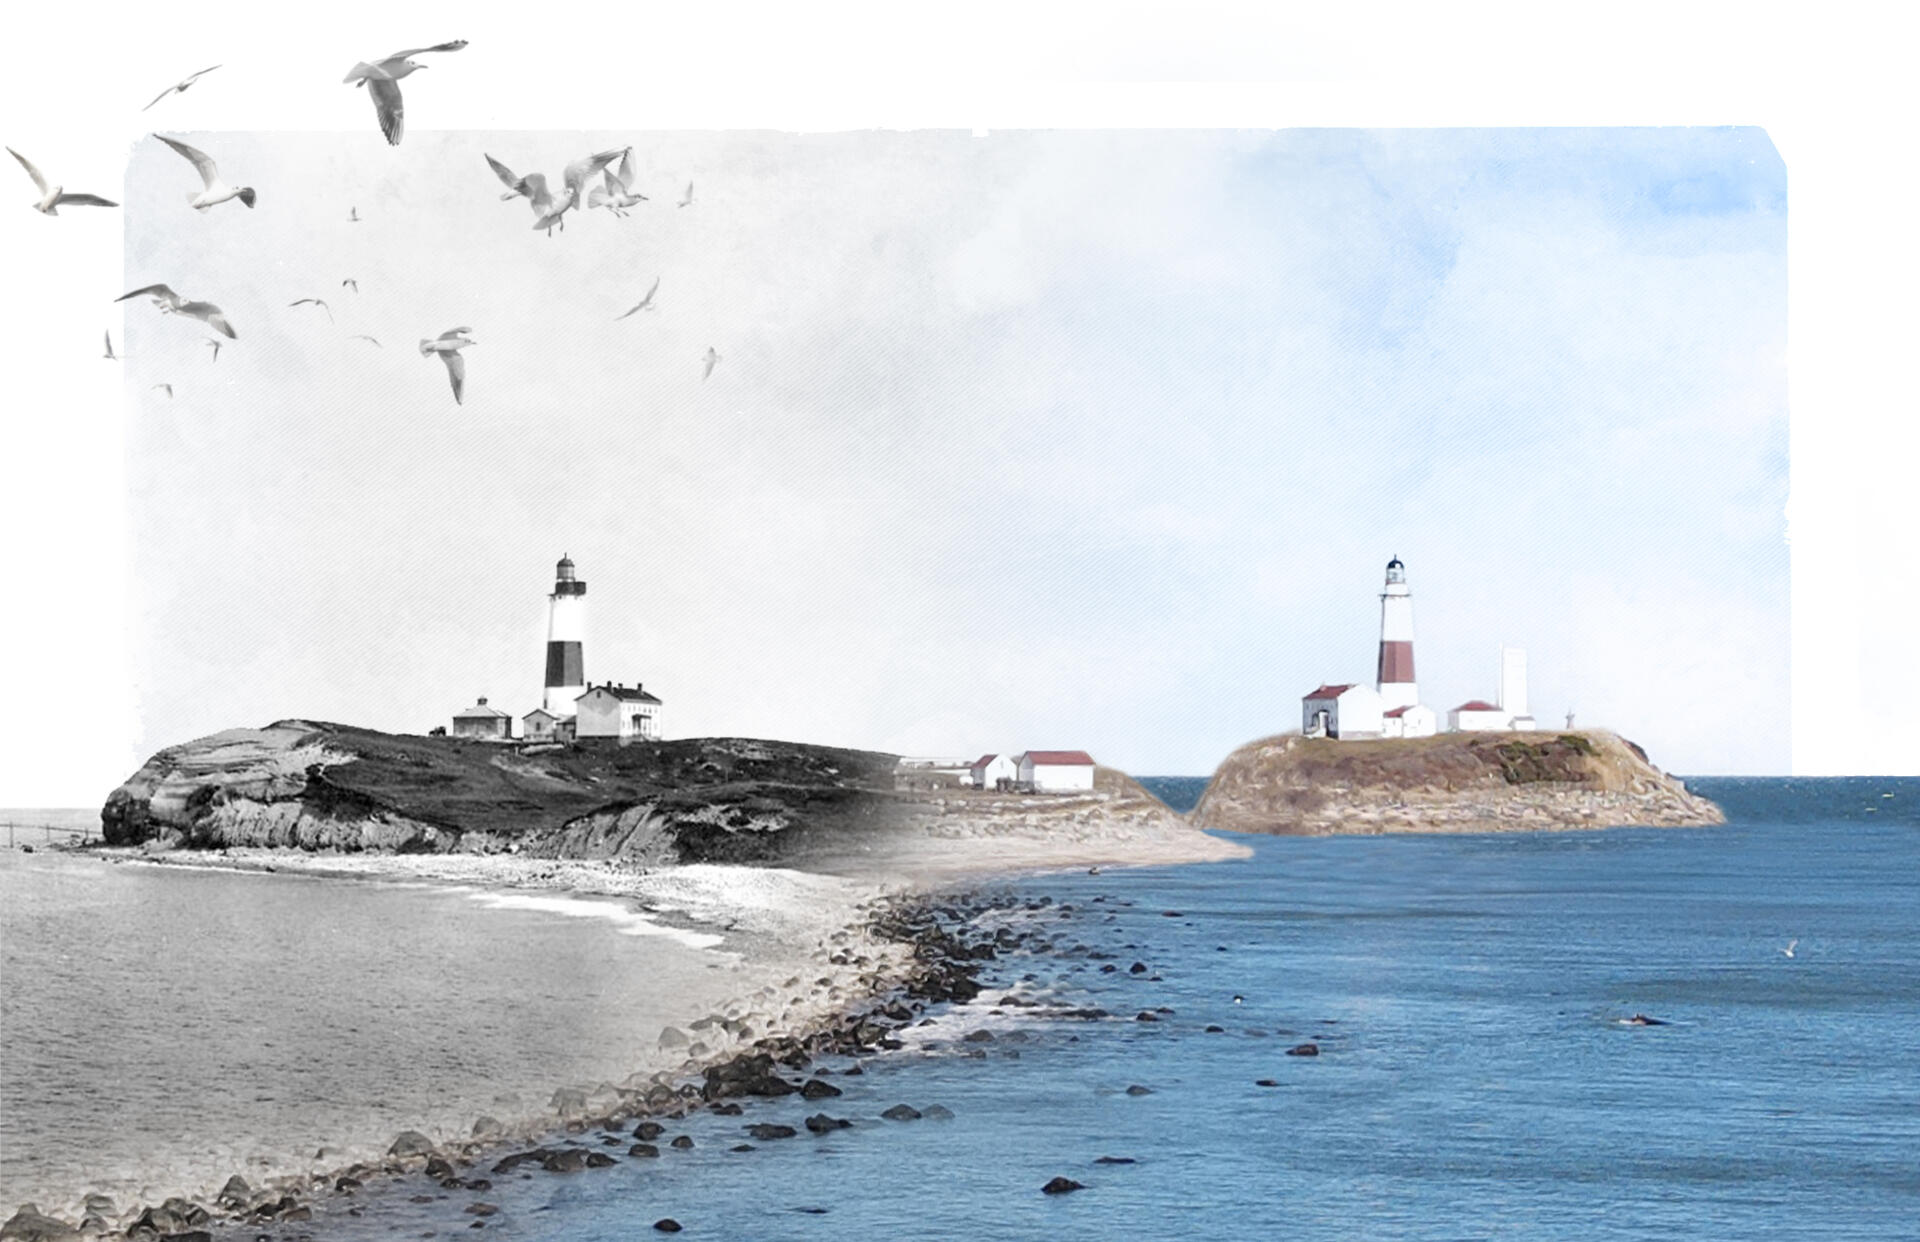 Digital collage of Montauk Point transitioning from bluffs to stabilized island.